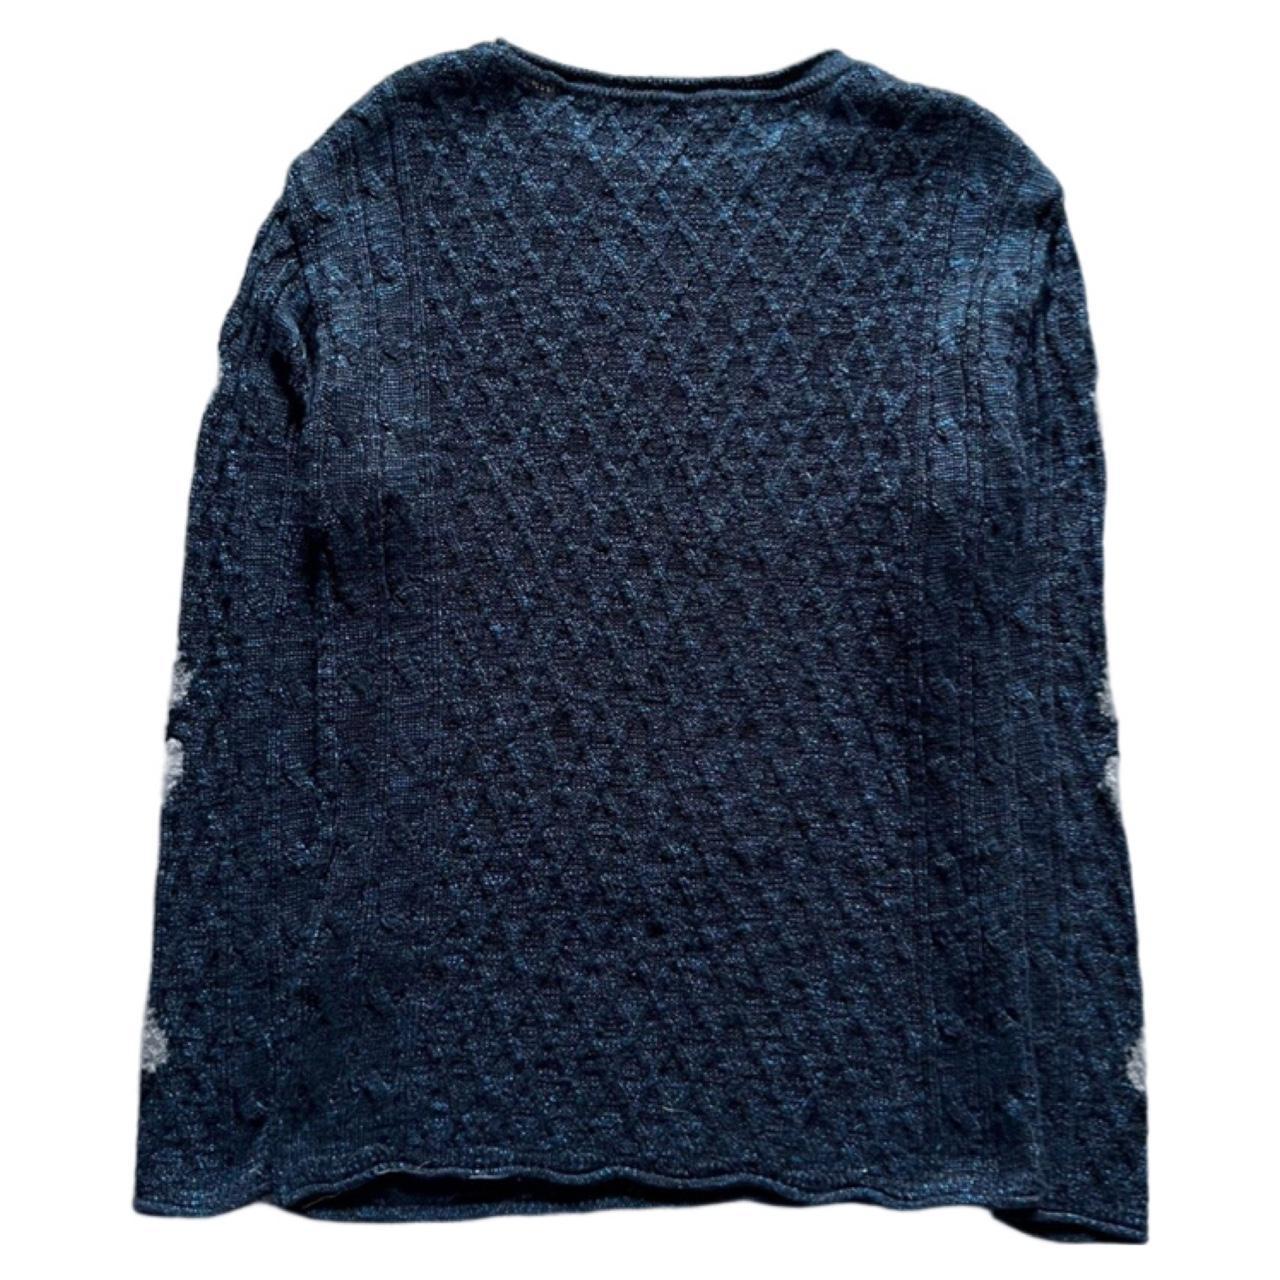 Hysteric Glamour Men's Navy and White Jumper (4)